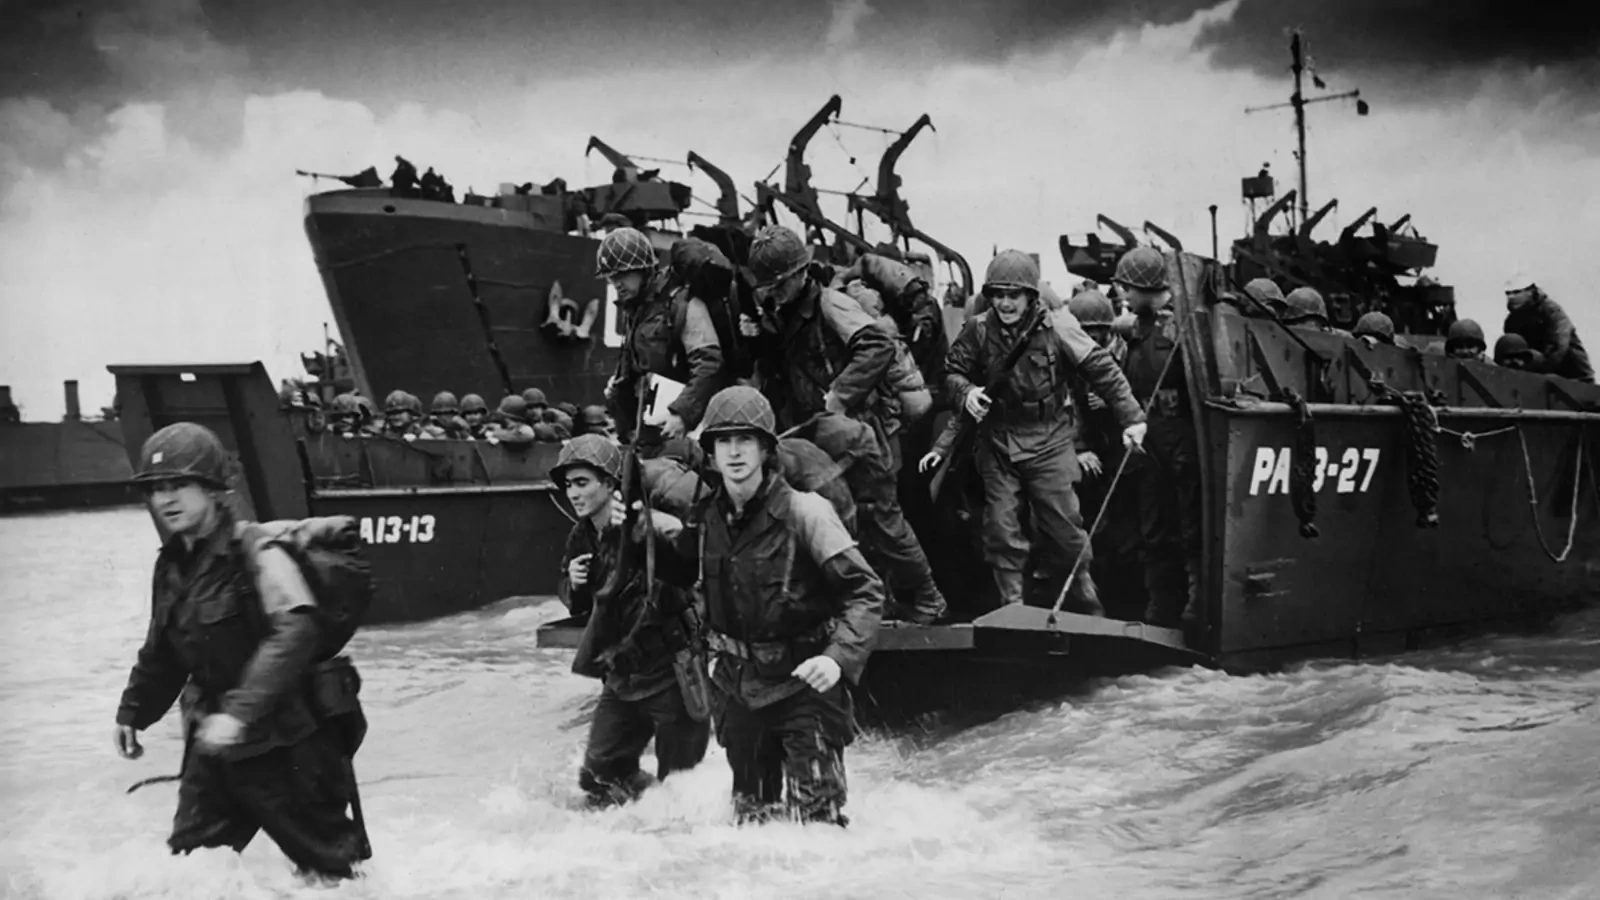 See How Much You Know About World War II | Council on Foreign Relations